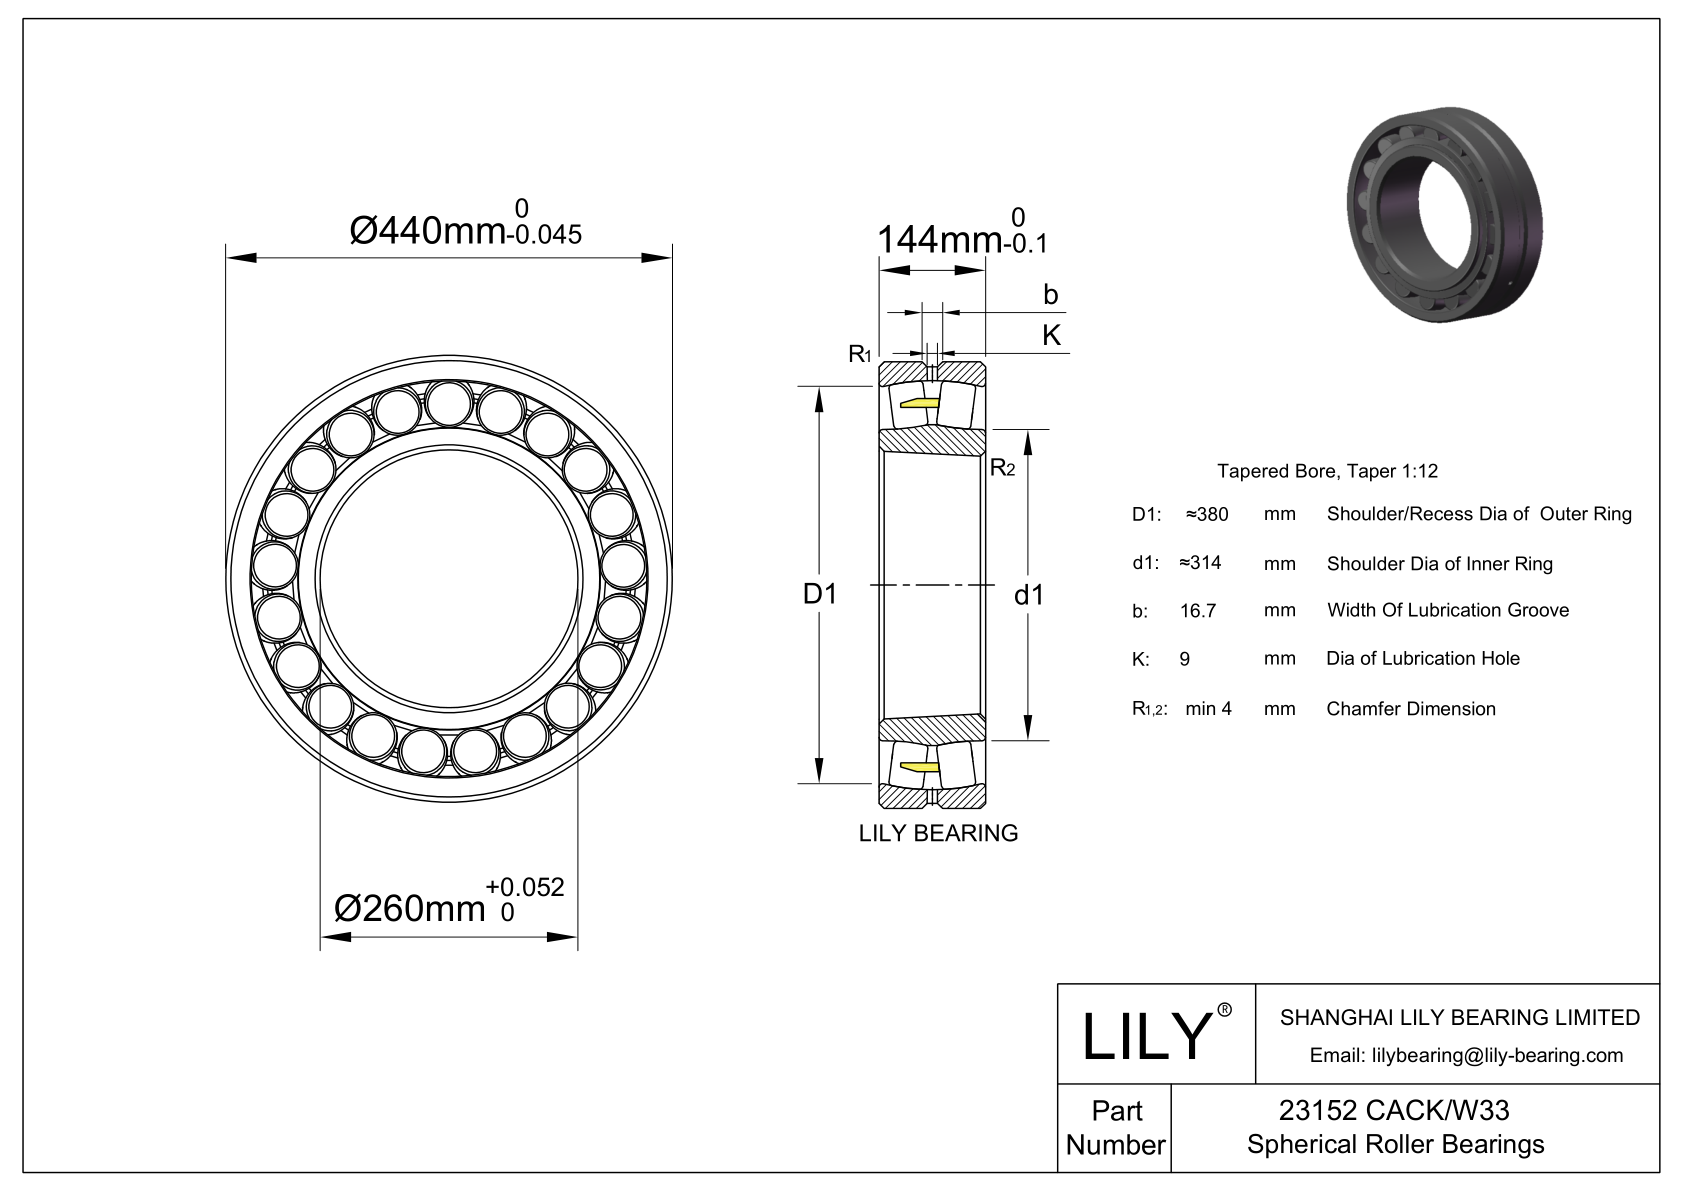 23152 CACK/W33 Double Row Spherical Roller Bearing cad drawing